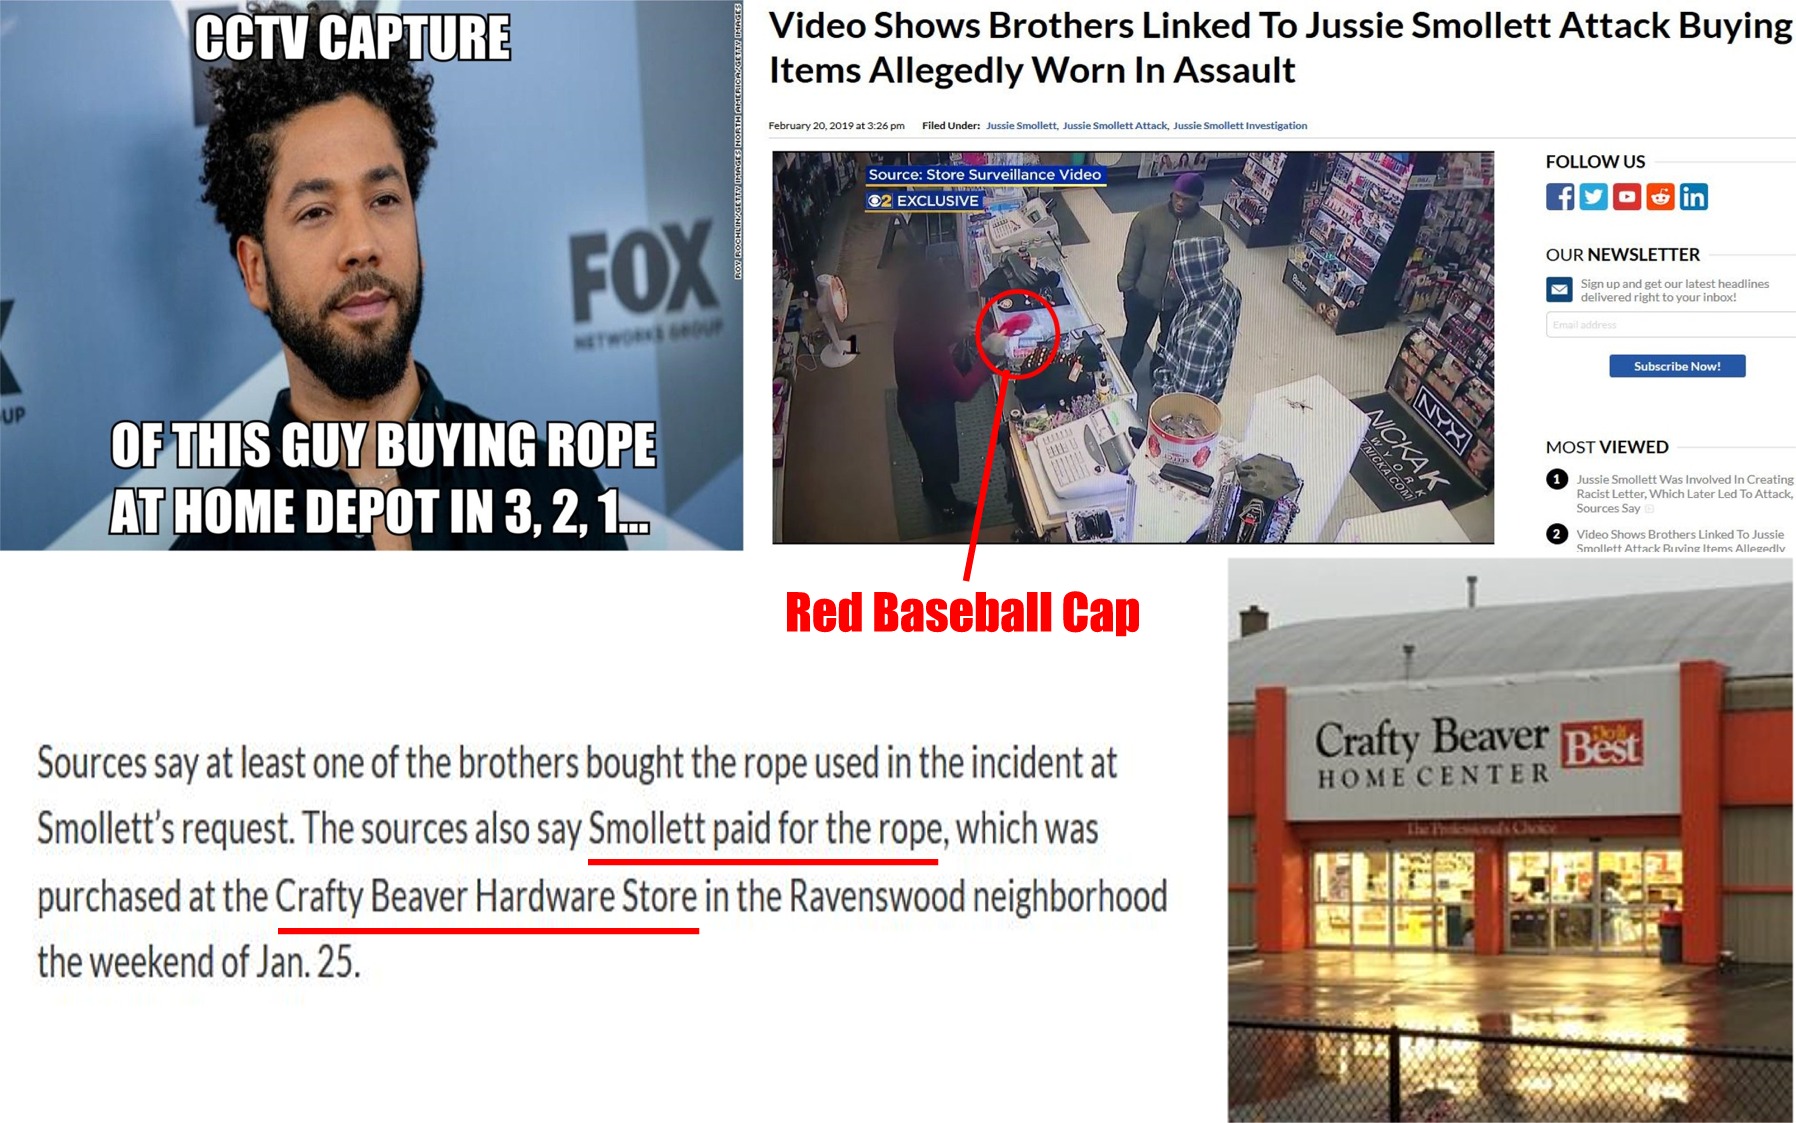 memes -  media - Cctv Capture Video Shows Brothers Linked To Jussie Smollett Attack Buying Items Allegedly Worn In Assault Us Surveillance video Our Newsletter Fox Of This Guy Buying Rope At Home Depot In 3, 2, 1... Red Baseball Cap Crafty Beaver Best Hom